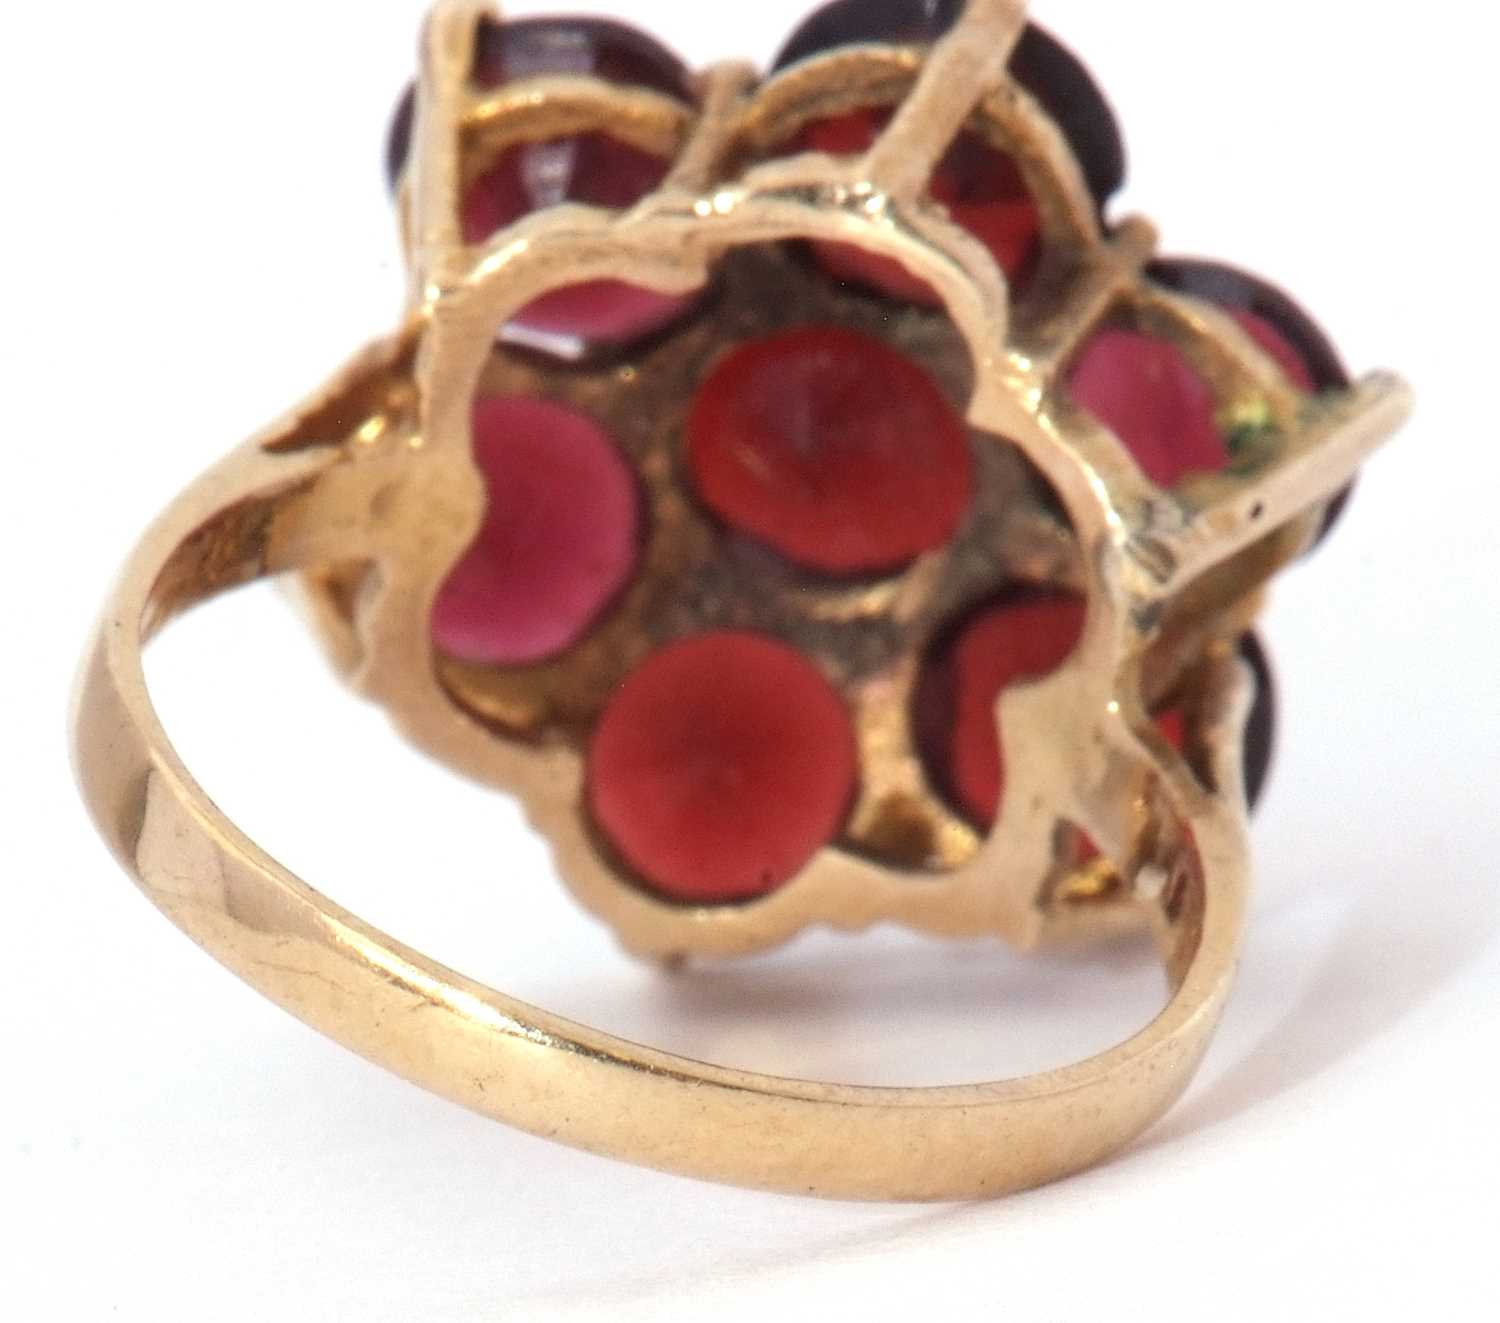 9ct gold large garnet cluster ring featuring seven round garnets, head size 18mm diameter, all in - Image 4 of 8